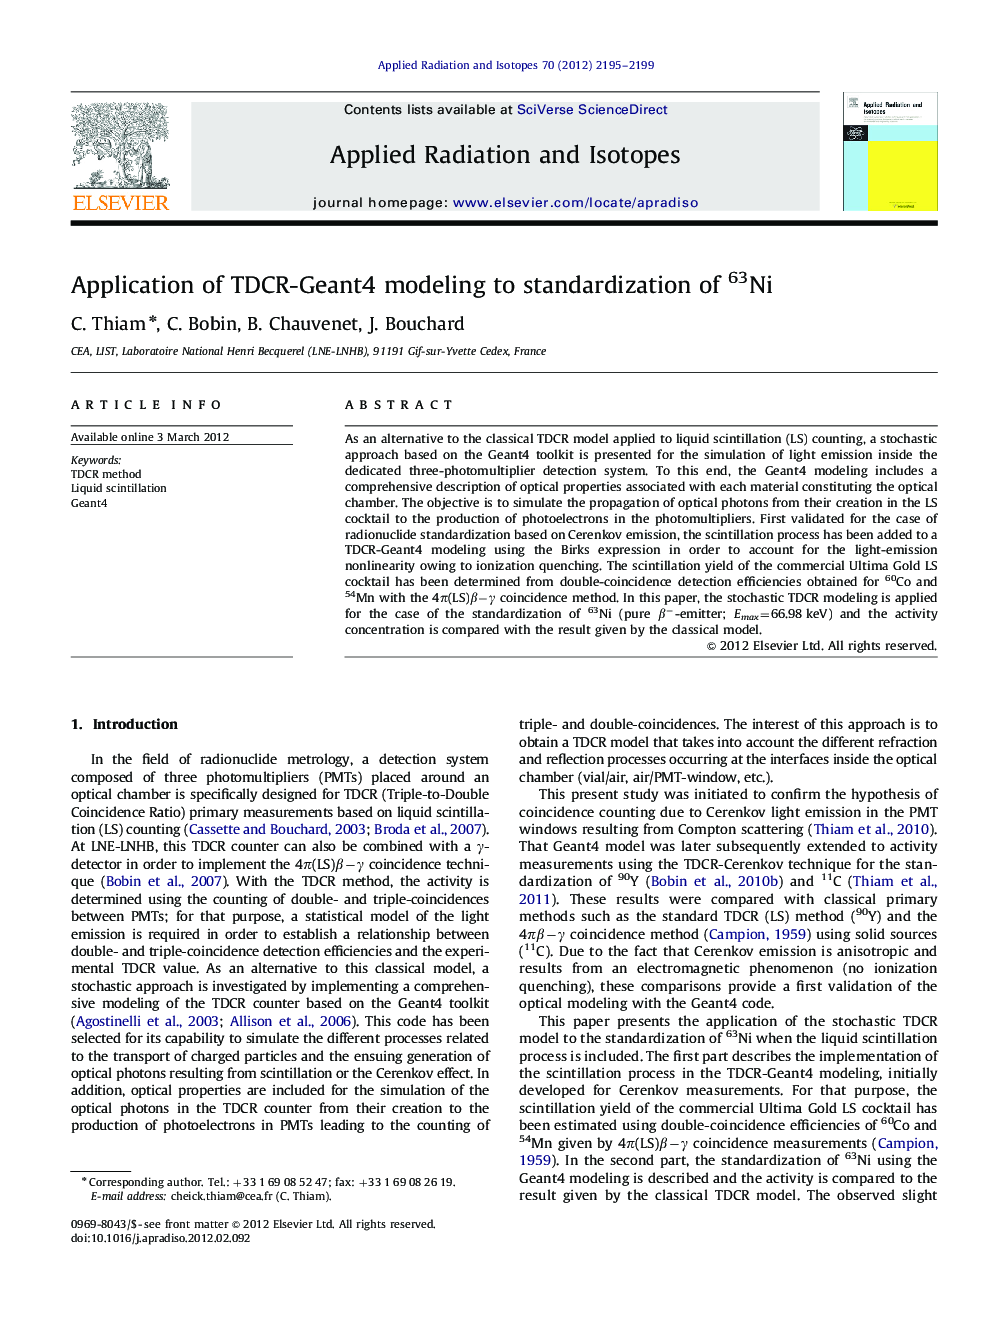 Application of TDCR-Geant4 modeling to standardization of 63Ni